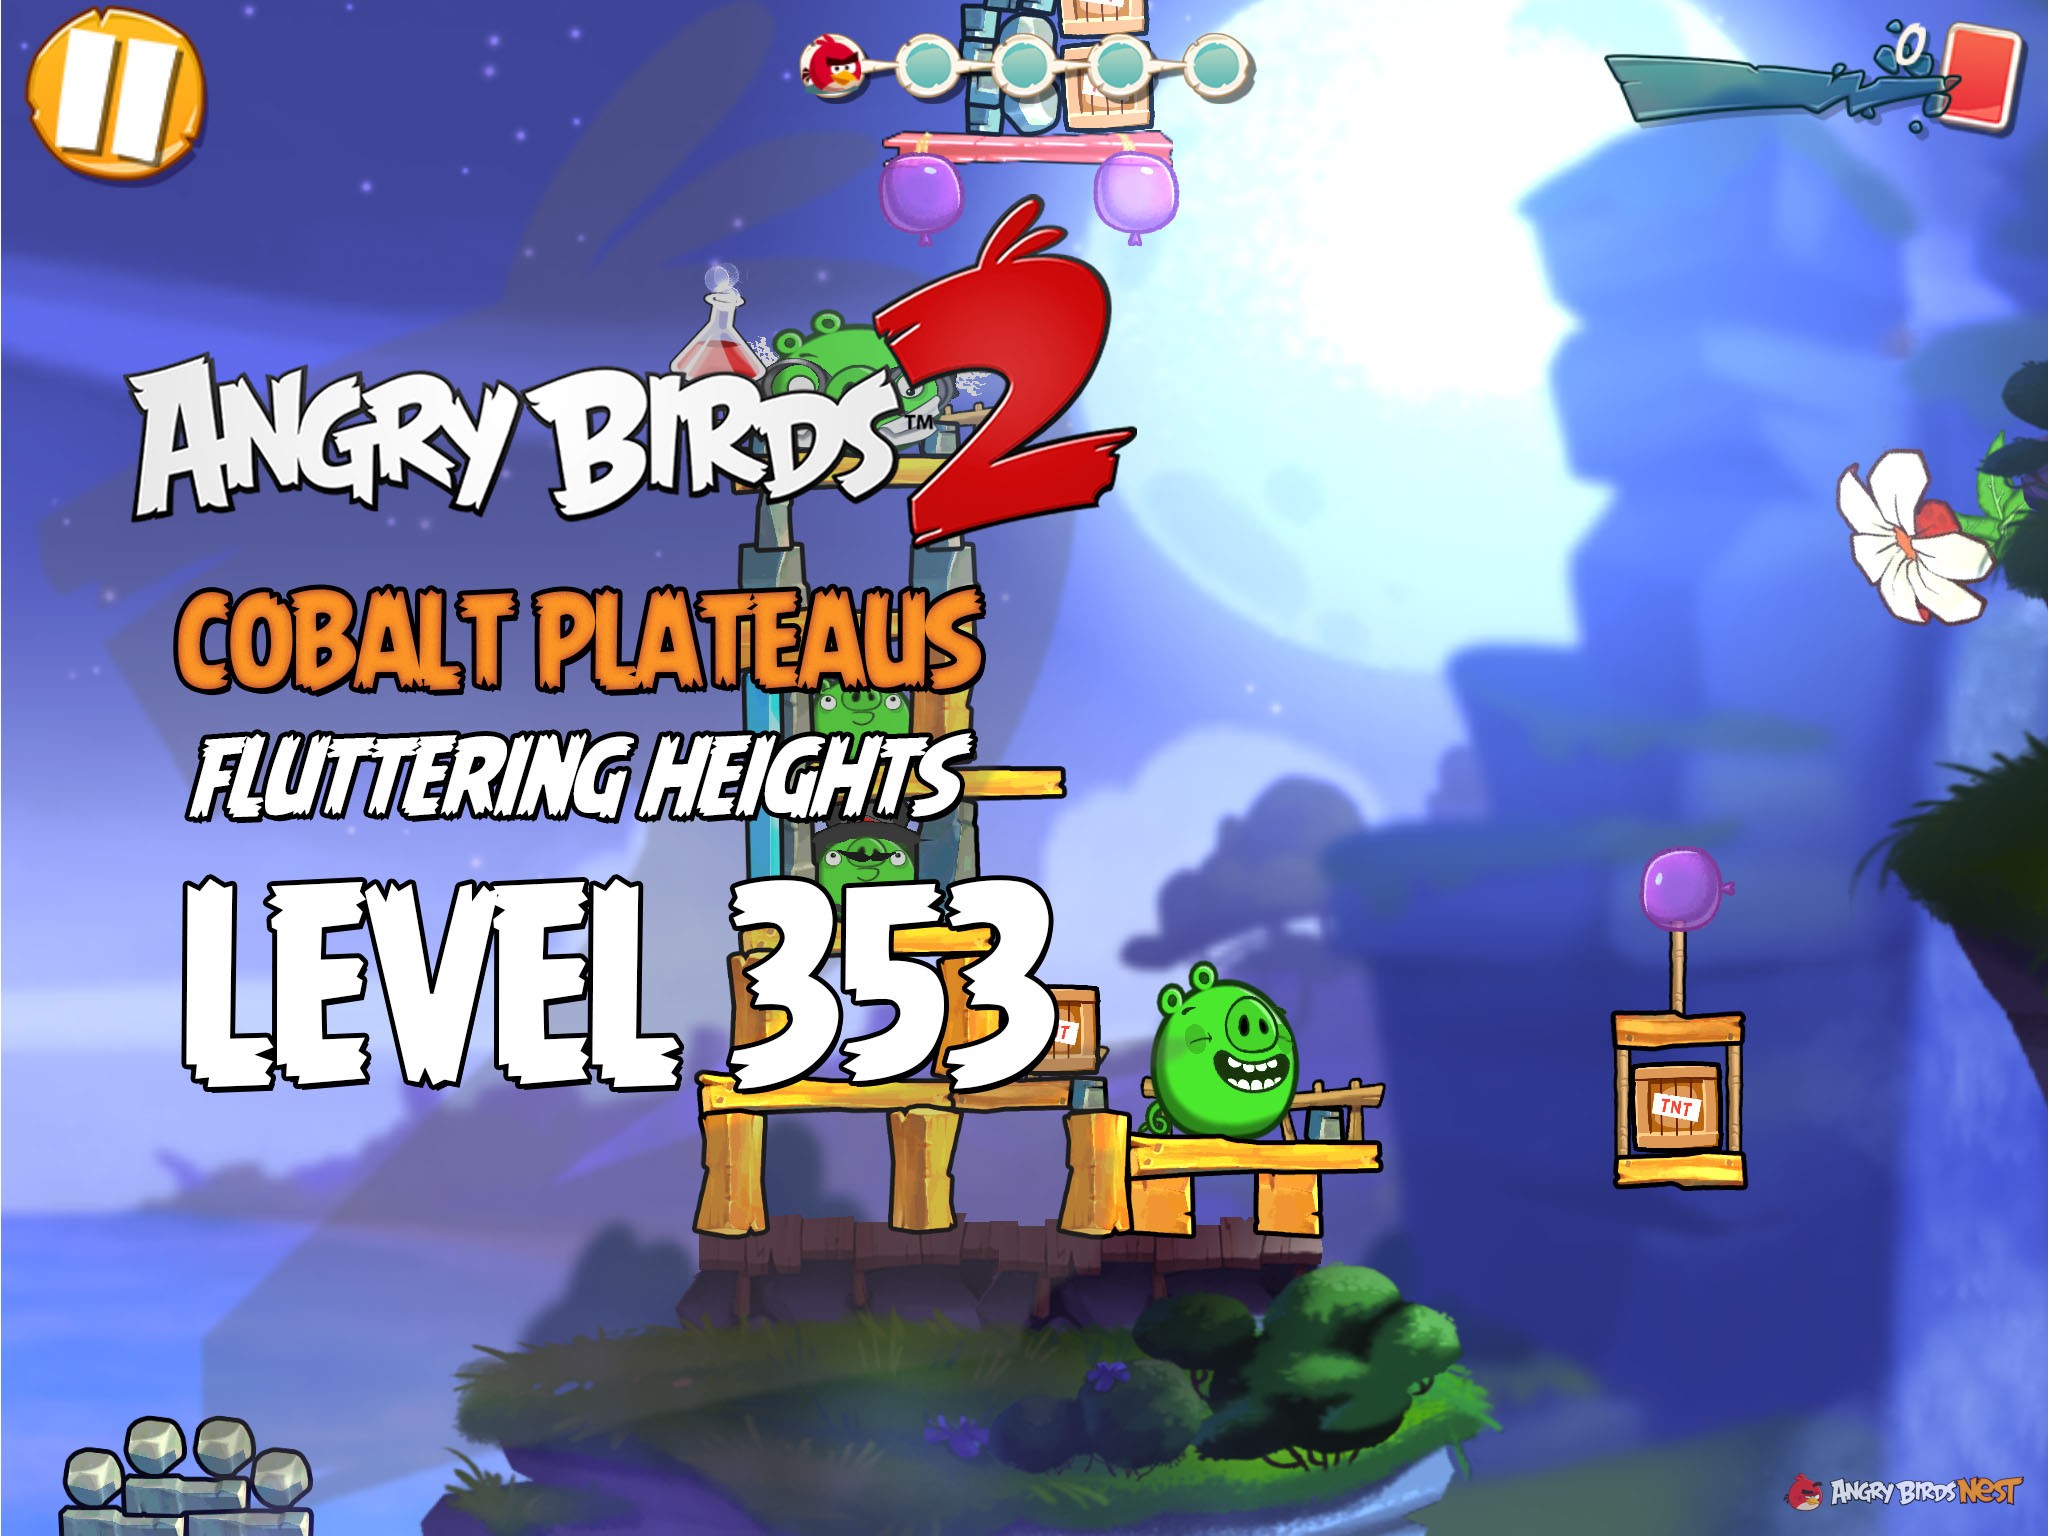 Angry Birds 2 Cobalt Plateaus Fluttering Heights Level 353